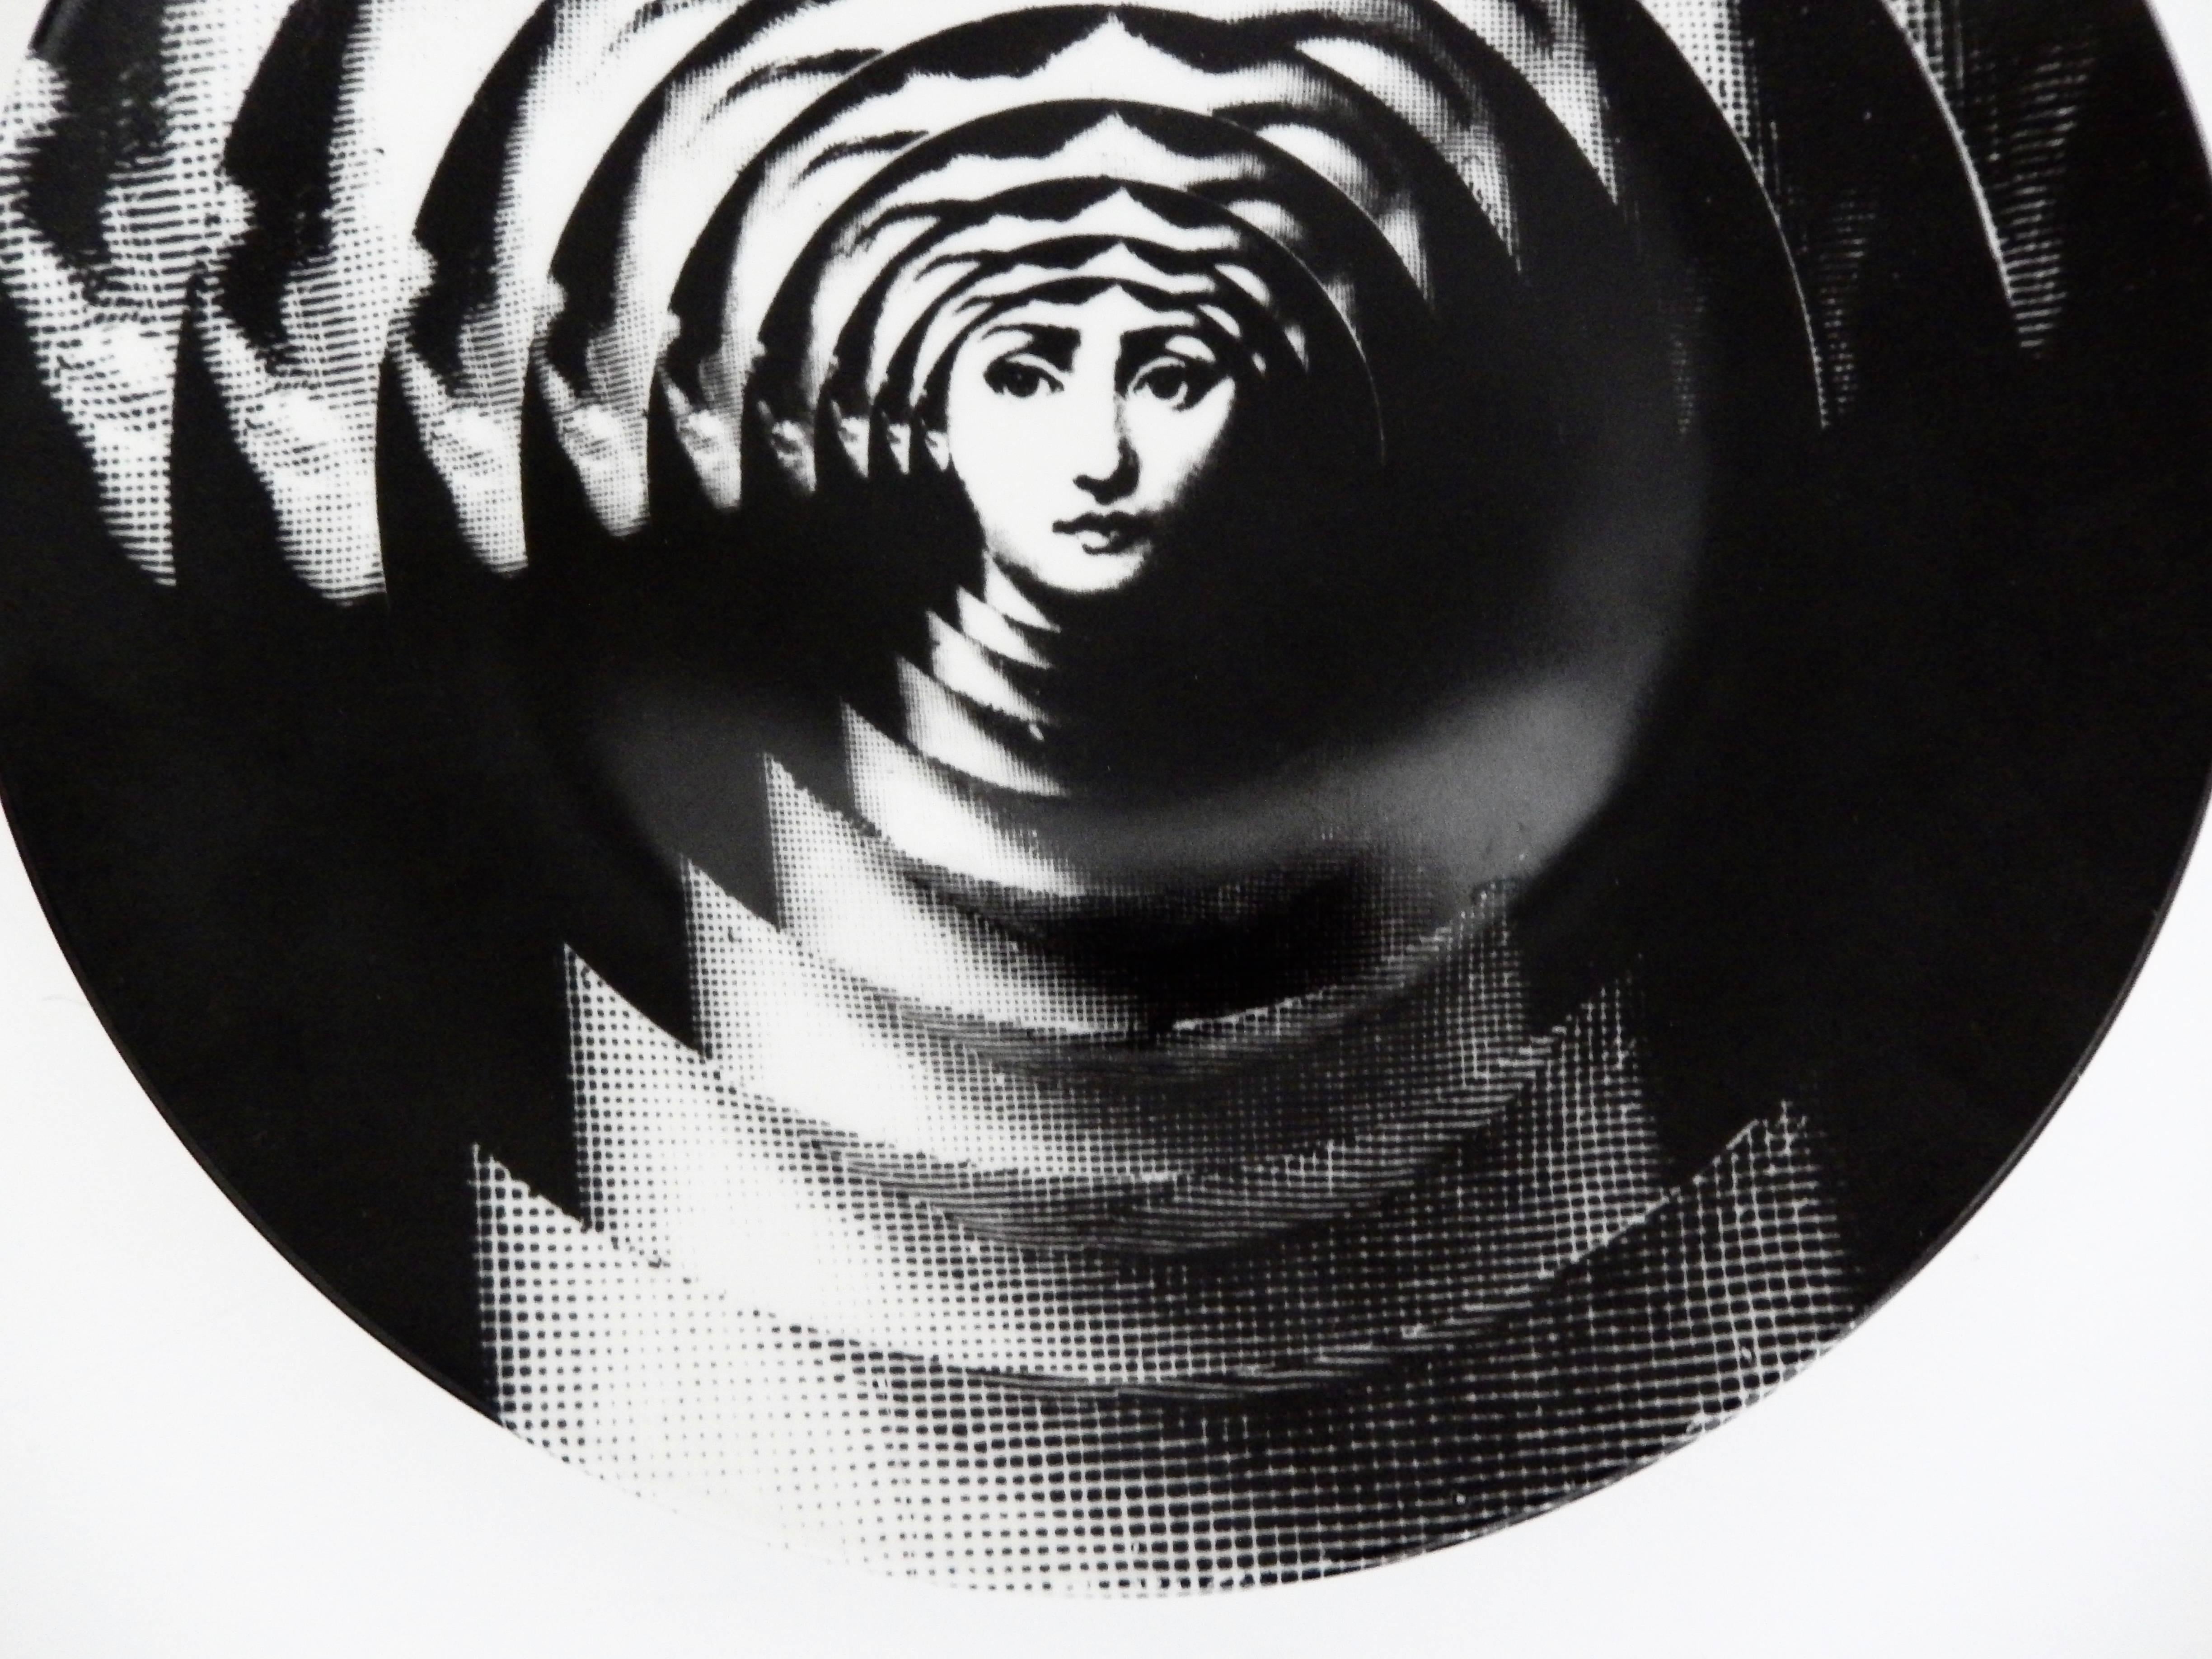 A porcelain plate with a mesmerizing Op Art design by Piero Fornasetti (1913-1988). He depicts his muse, Lina Cavalieri, in a series of overlapping plates, creating the illusion of movement.
Very strong graphic design. Marked: Rosenthal Germany.